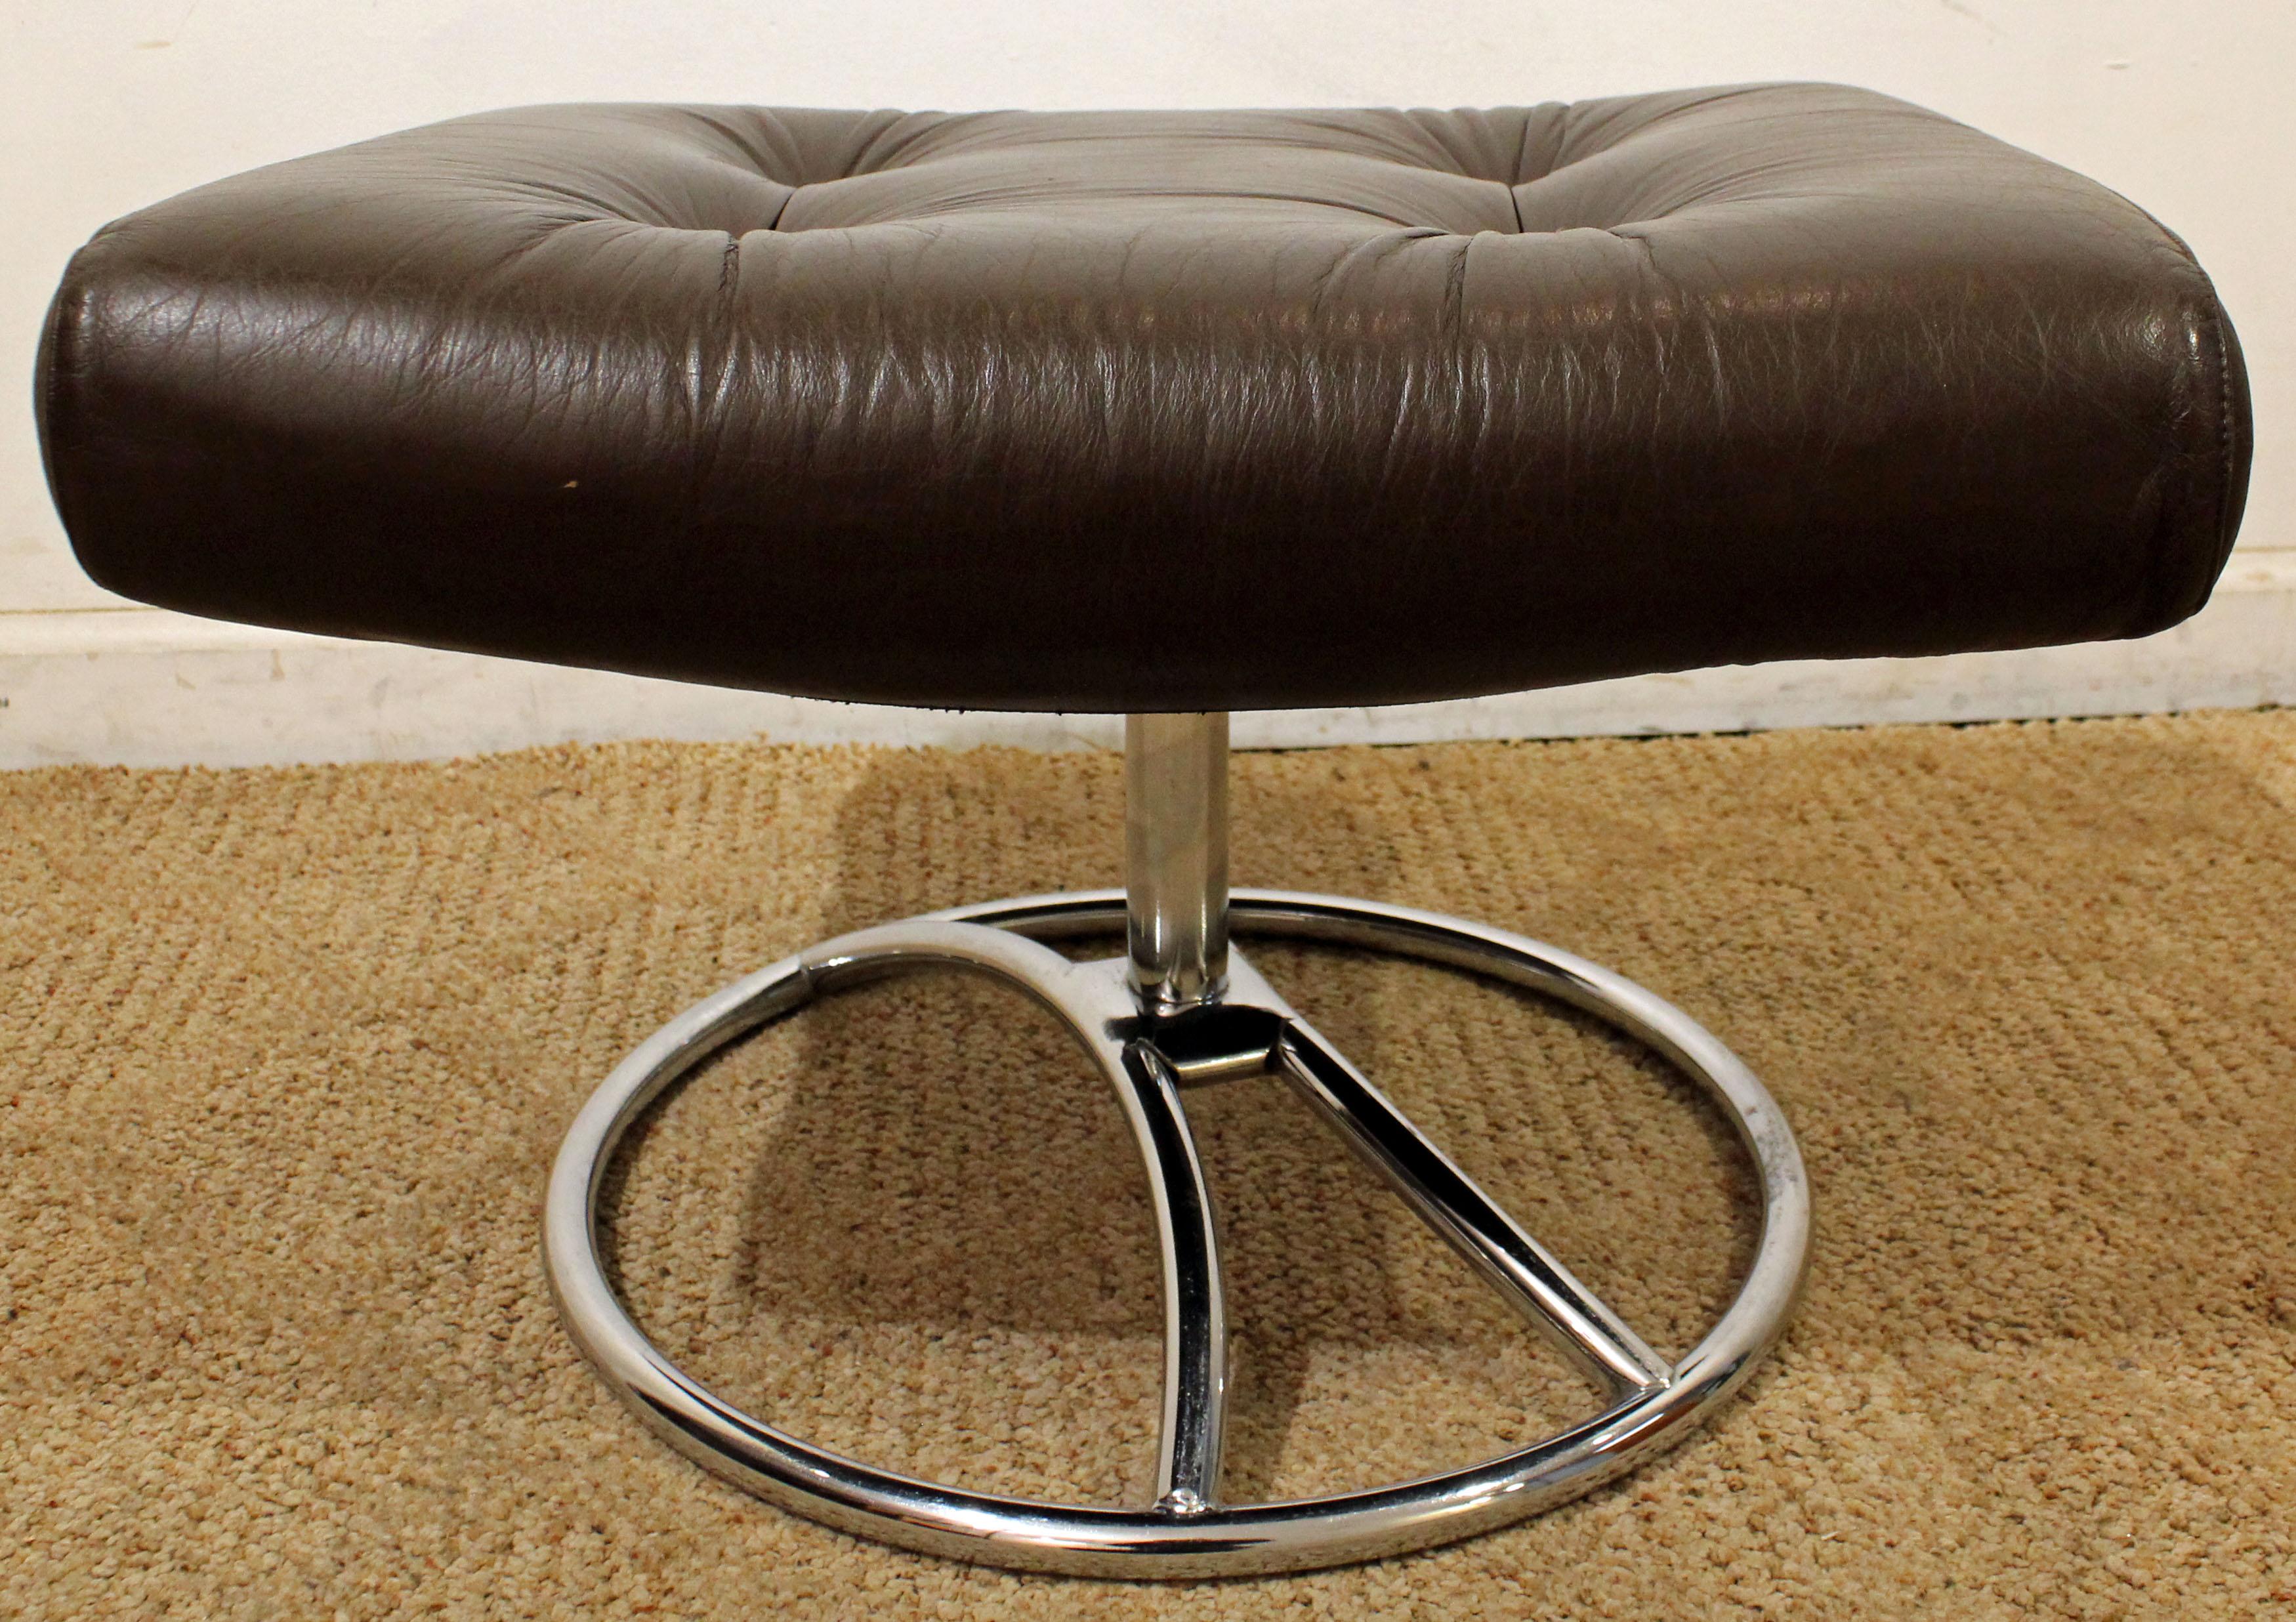 Offered is an Ekornes Stressless chrome leather ottoman. It is made of leather and chrome, and it swivels. This piece is in good condition, shows some age wear. It is not signed.

Approx. dimensions:
21.5